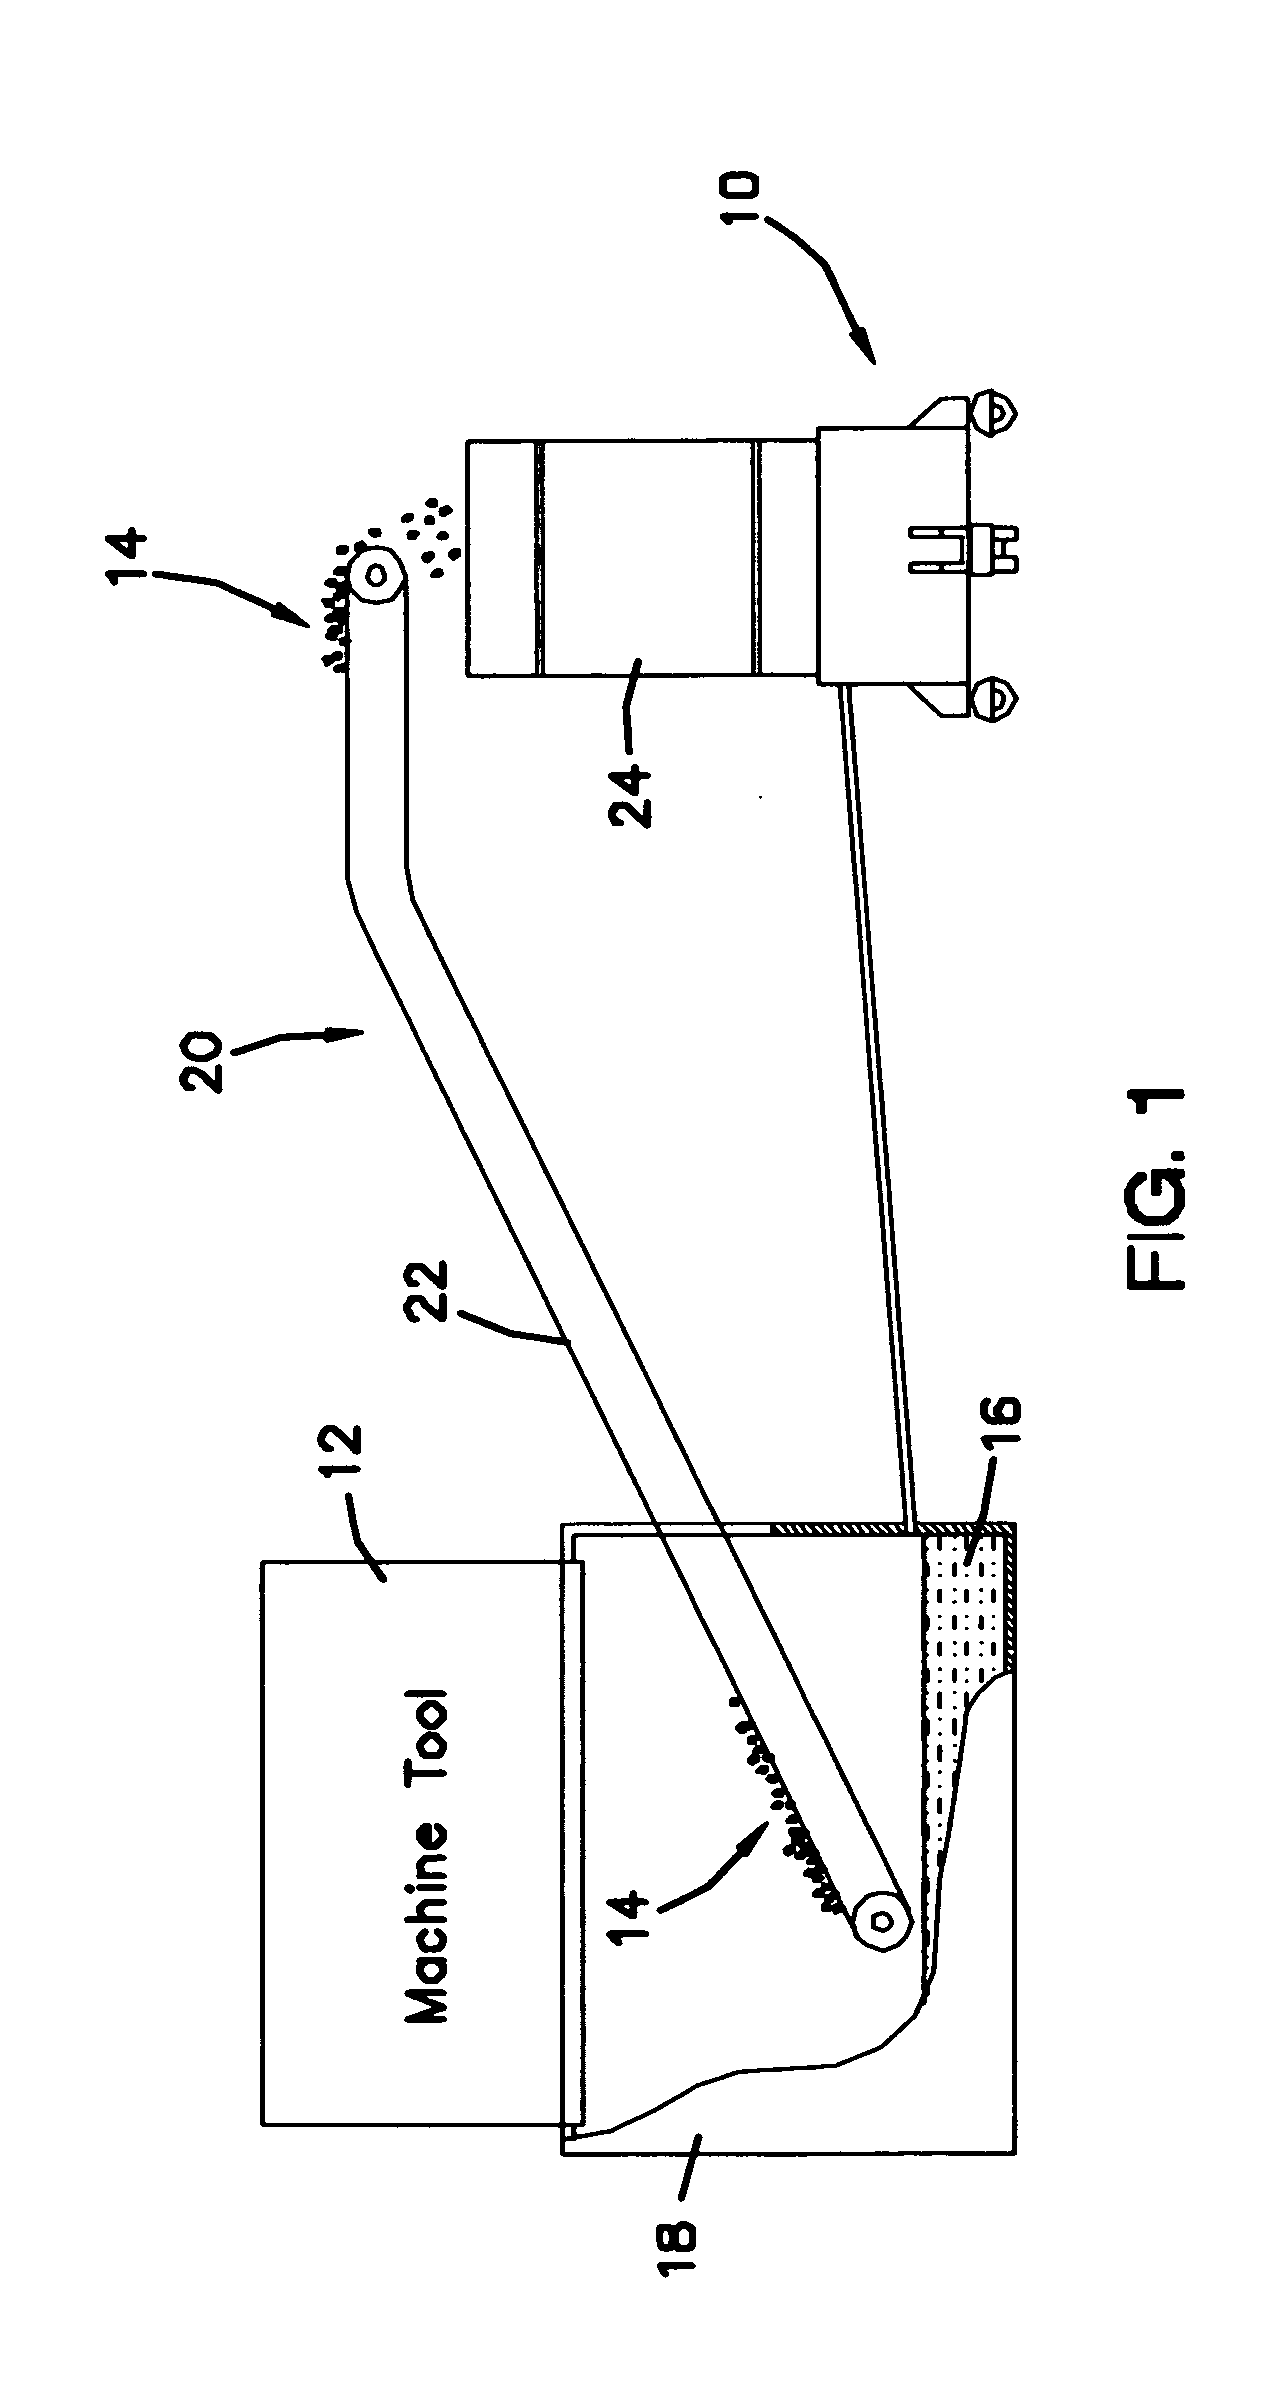 Apparatus for use in reclaiming coolant used in cutting machines